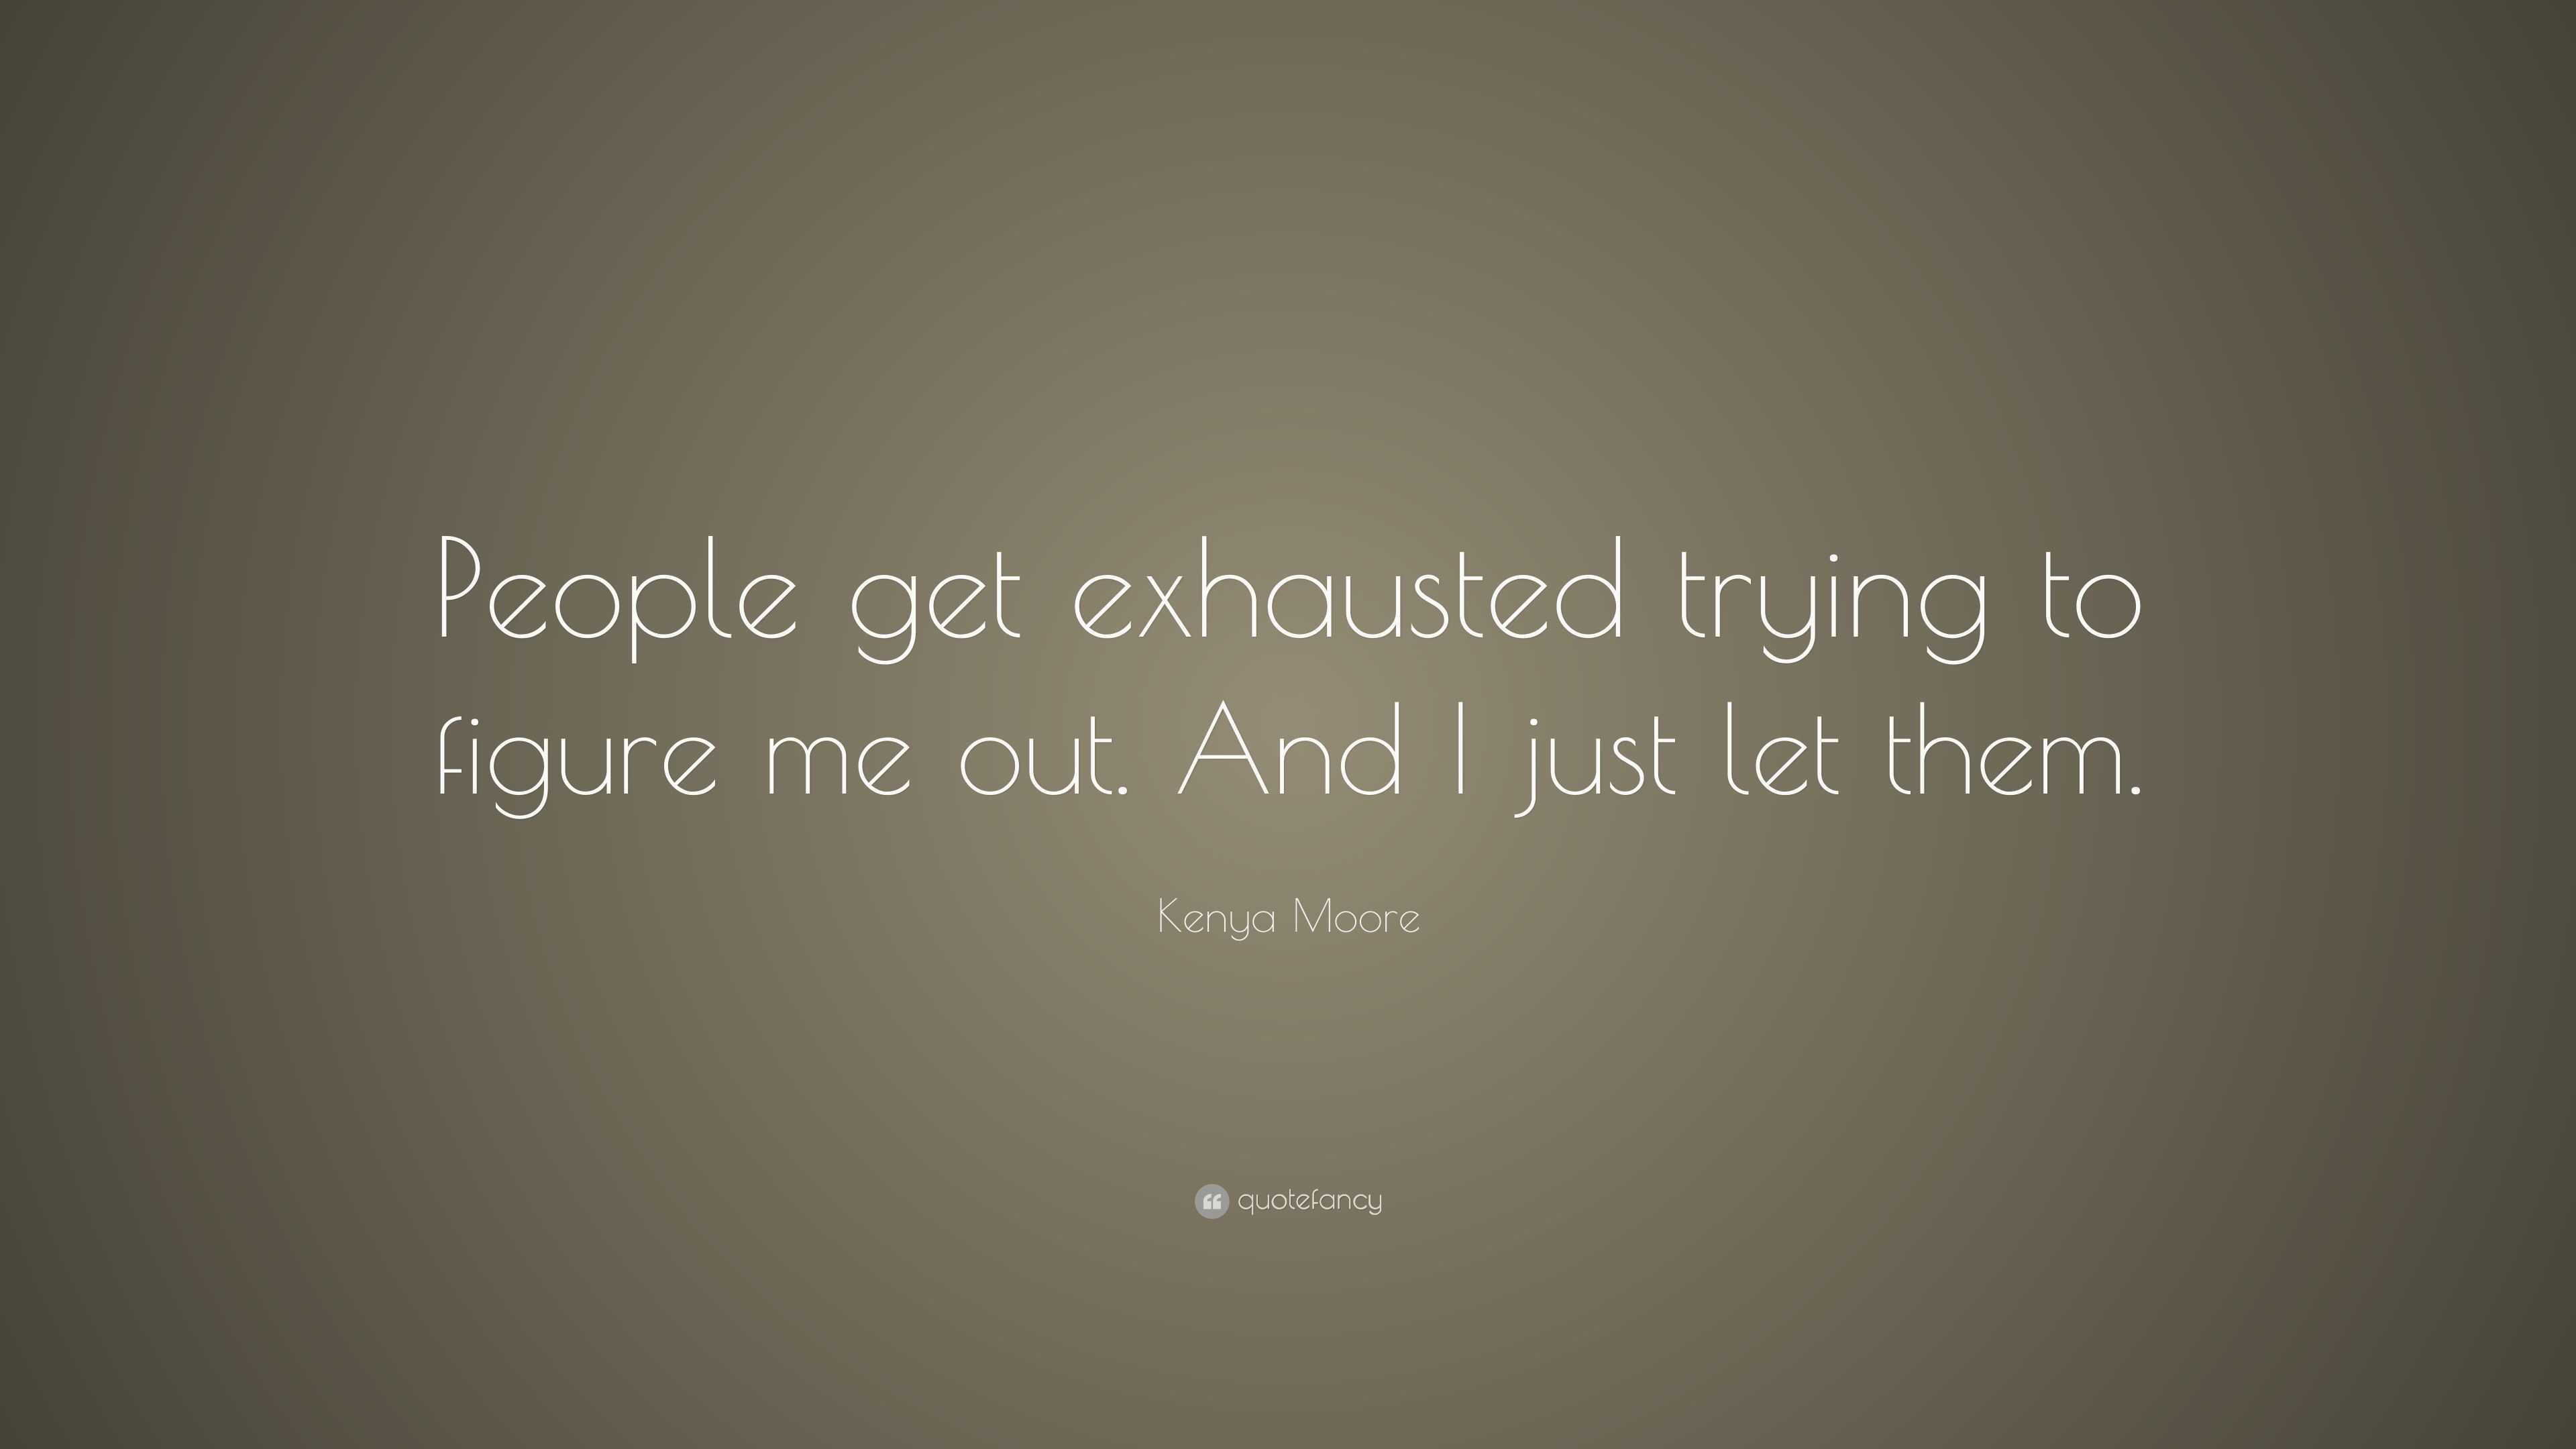 Kenya Moore Quote “people Get Exhausted Trying To Figure Me Out And I